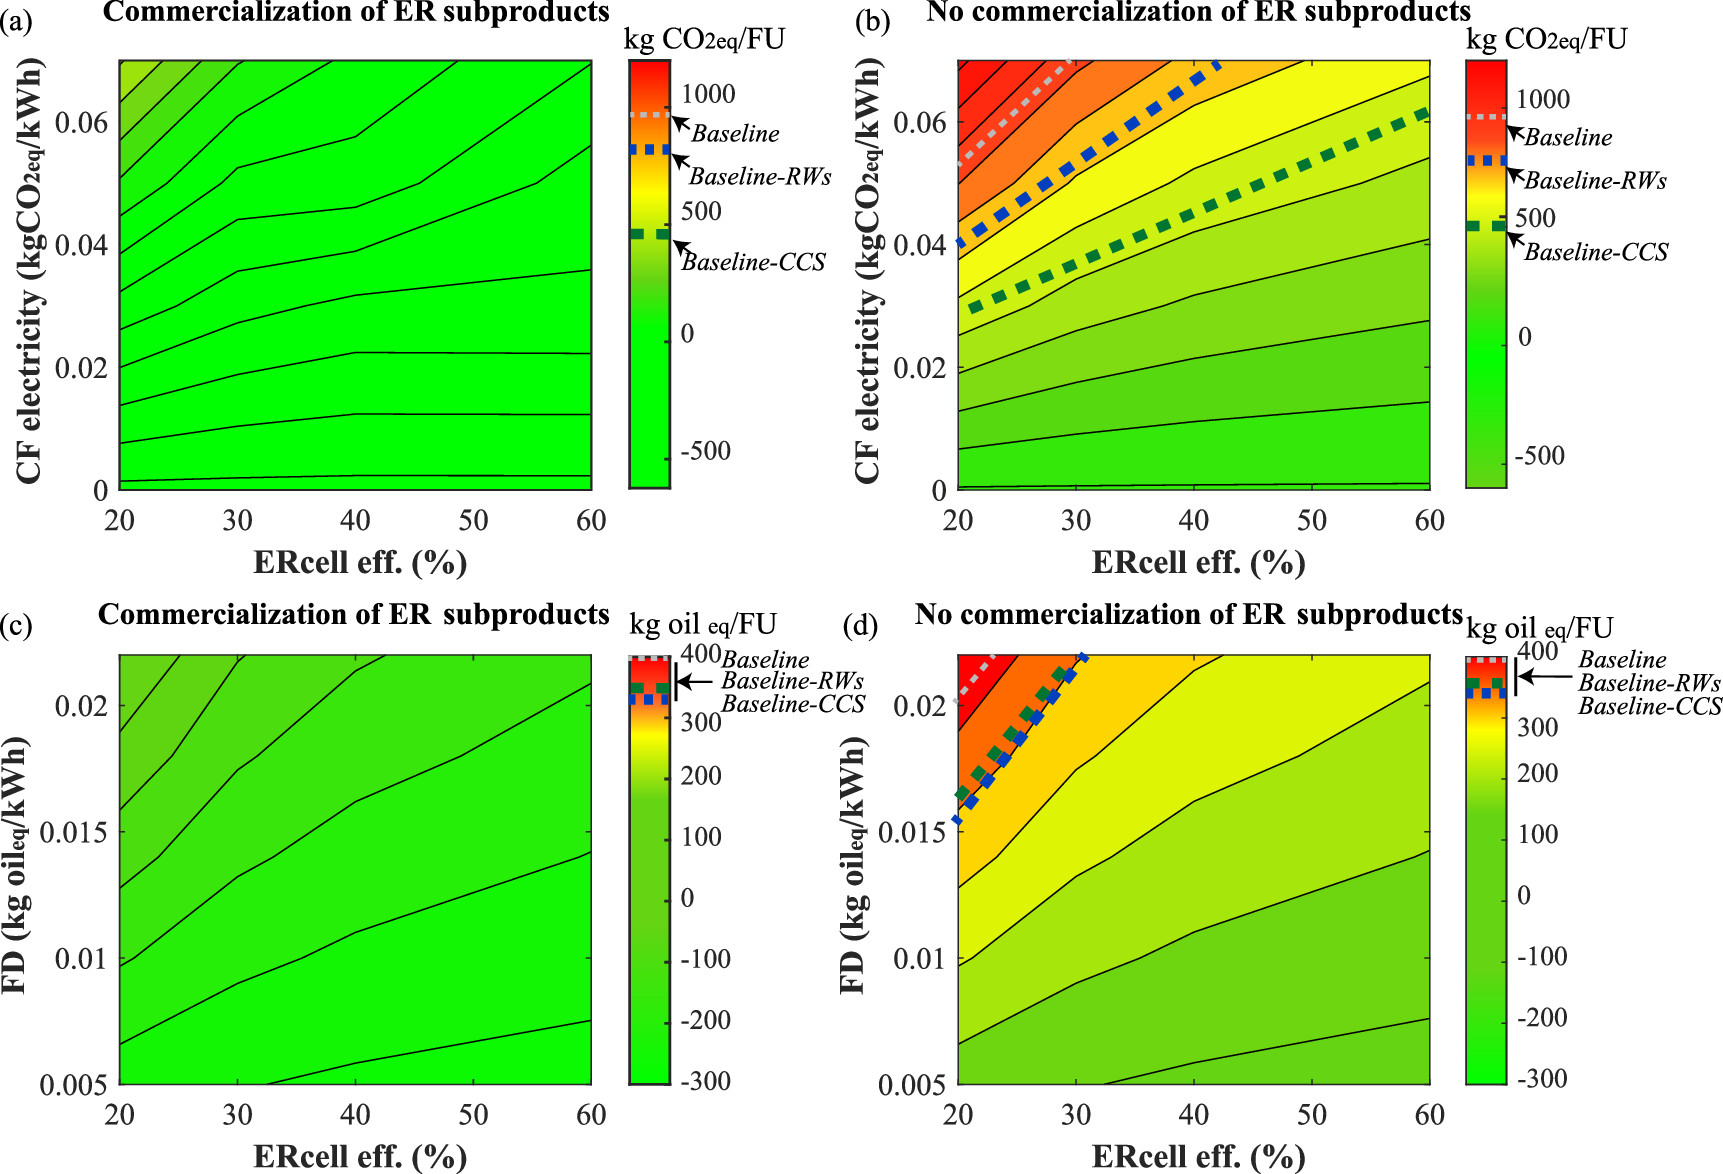 Sensitivity assessment of the influence of prospective CF and FD of PV solar electricity and the energy efficiency of the ER cell in the impact categories CF (a,b) and FD (c,d) with and without the commercialization of H2 and O2 subproducts.